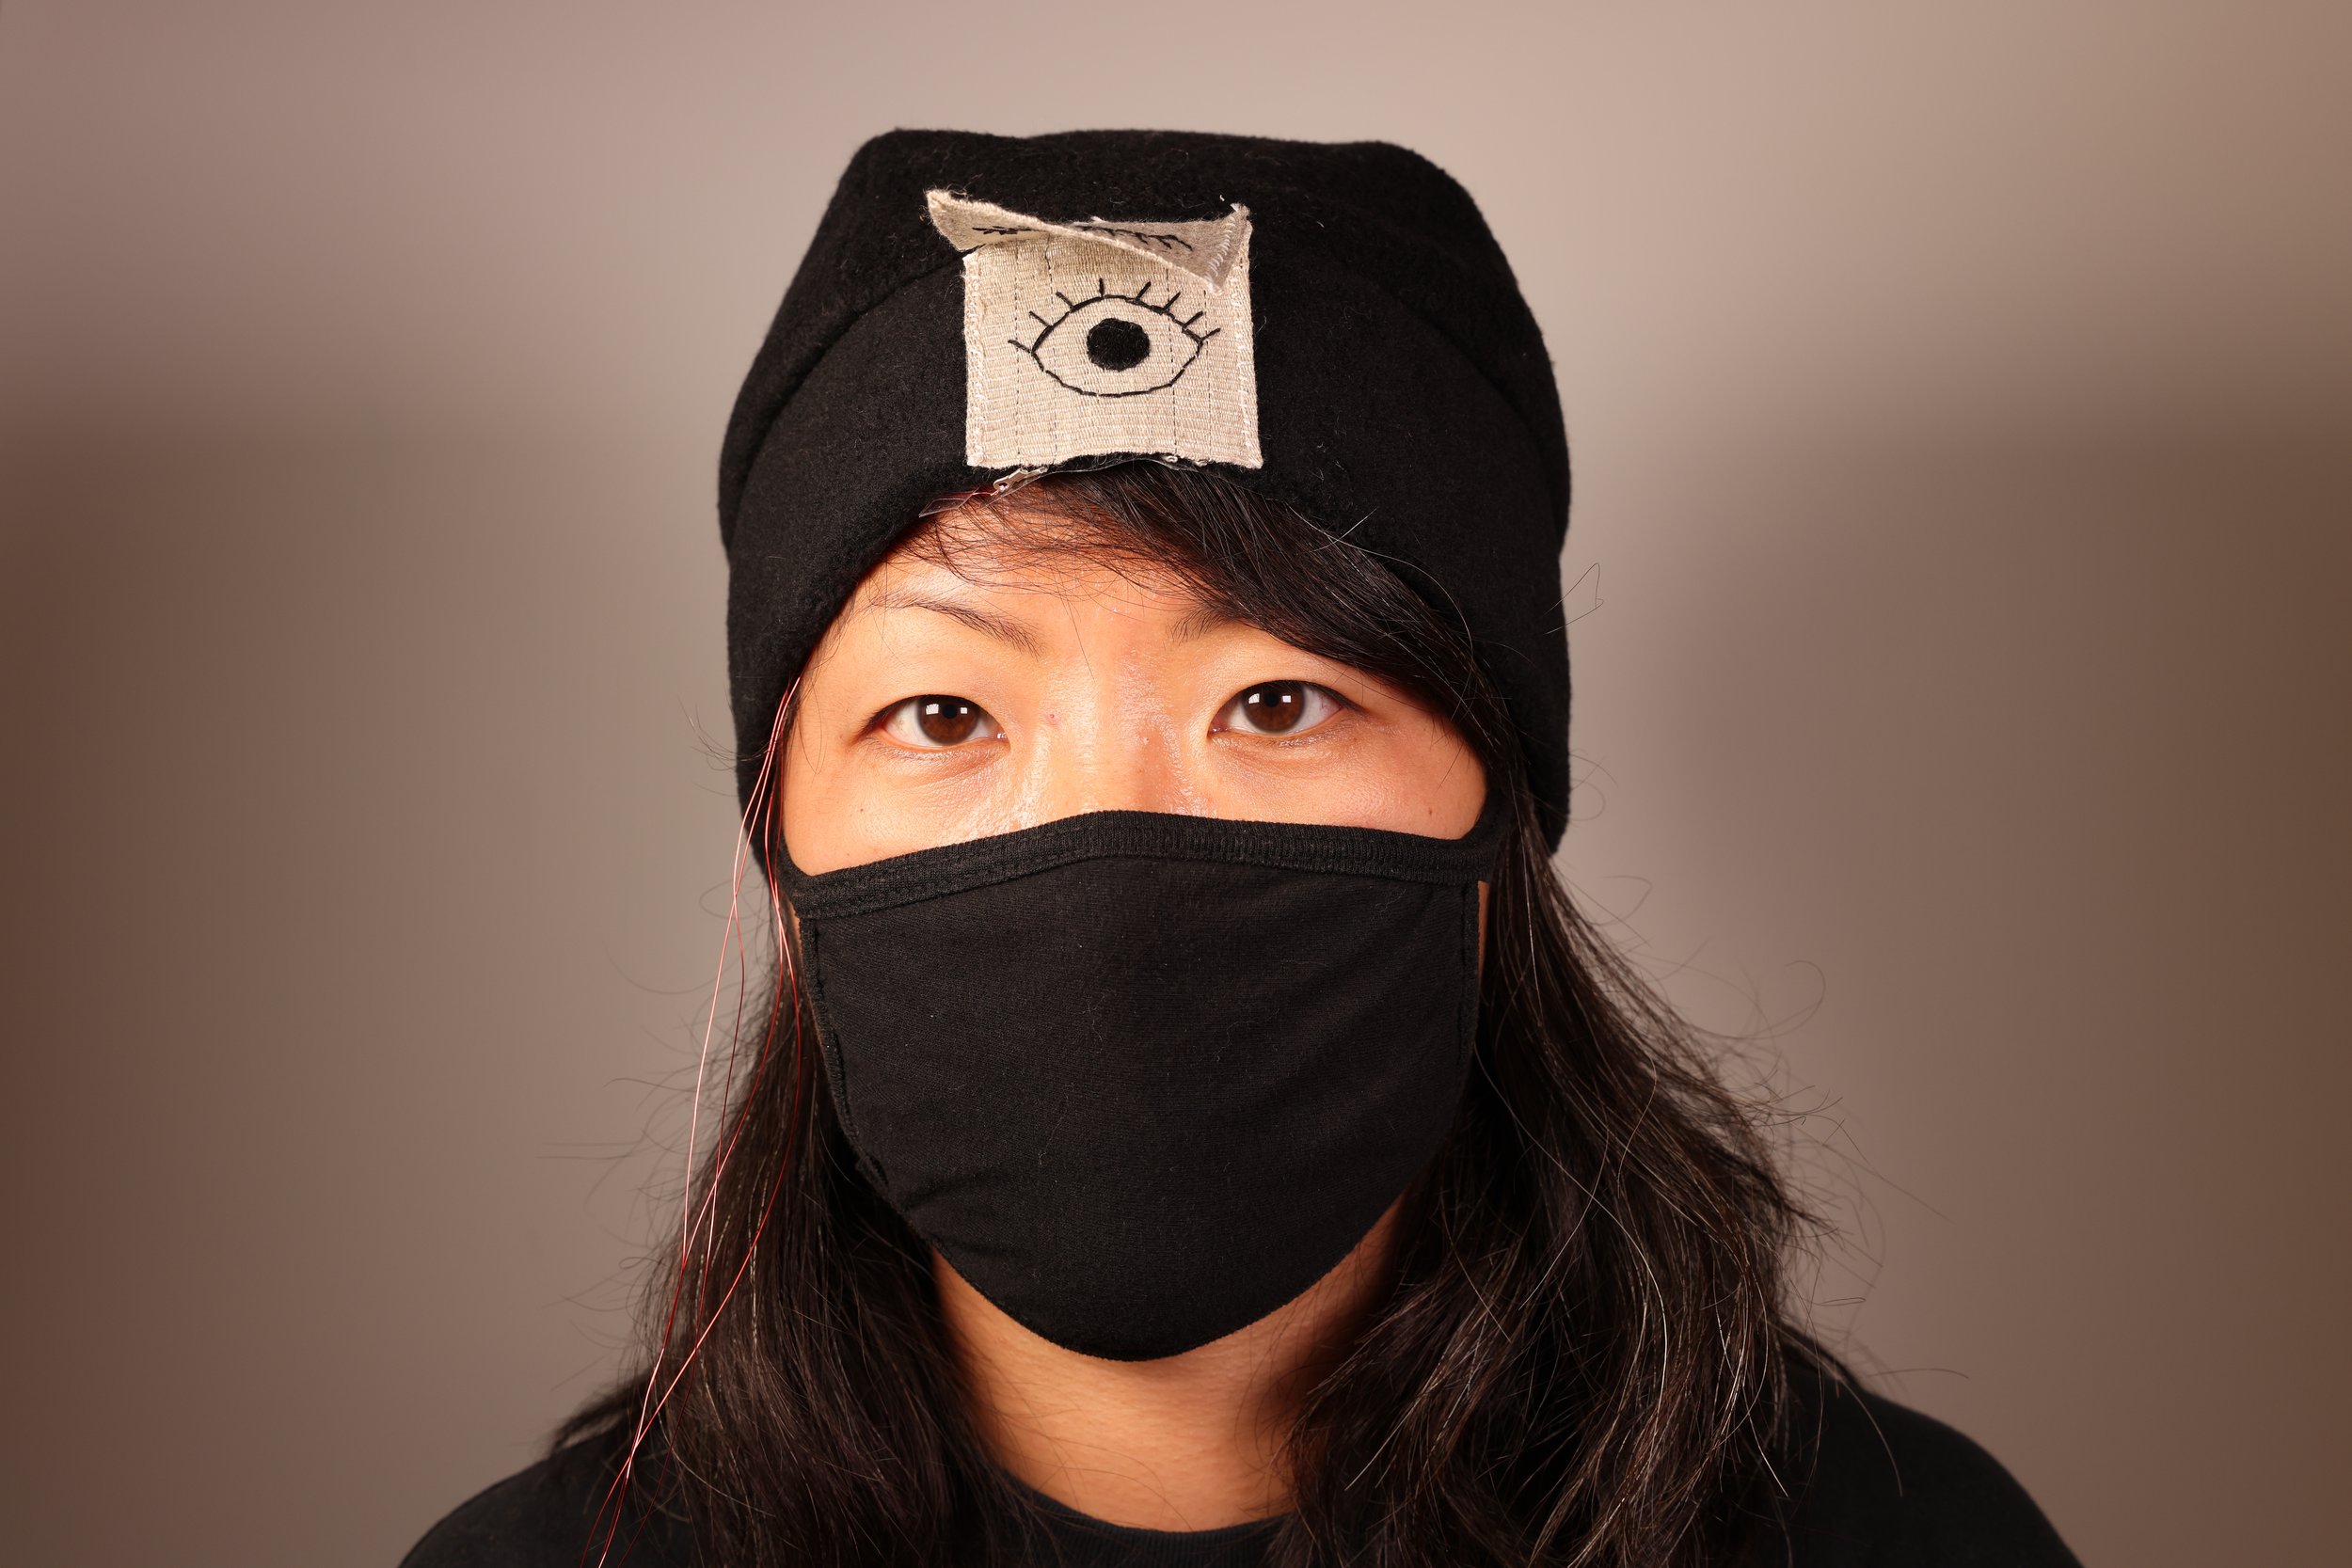  An open/close expanding patch is attached to a hat at the forehead position to resemble the effect of “opening the third eye”. ((Photo: Hybrid Body Lab) 